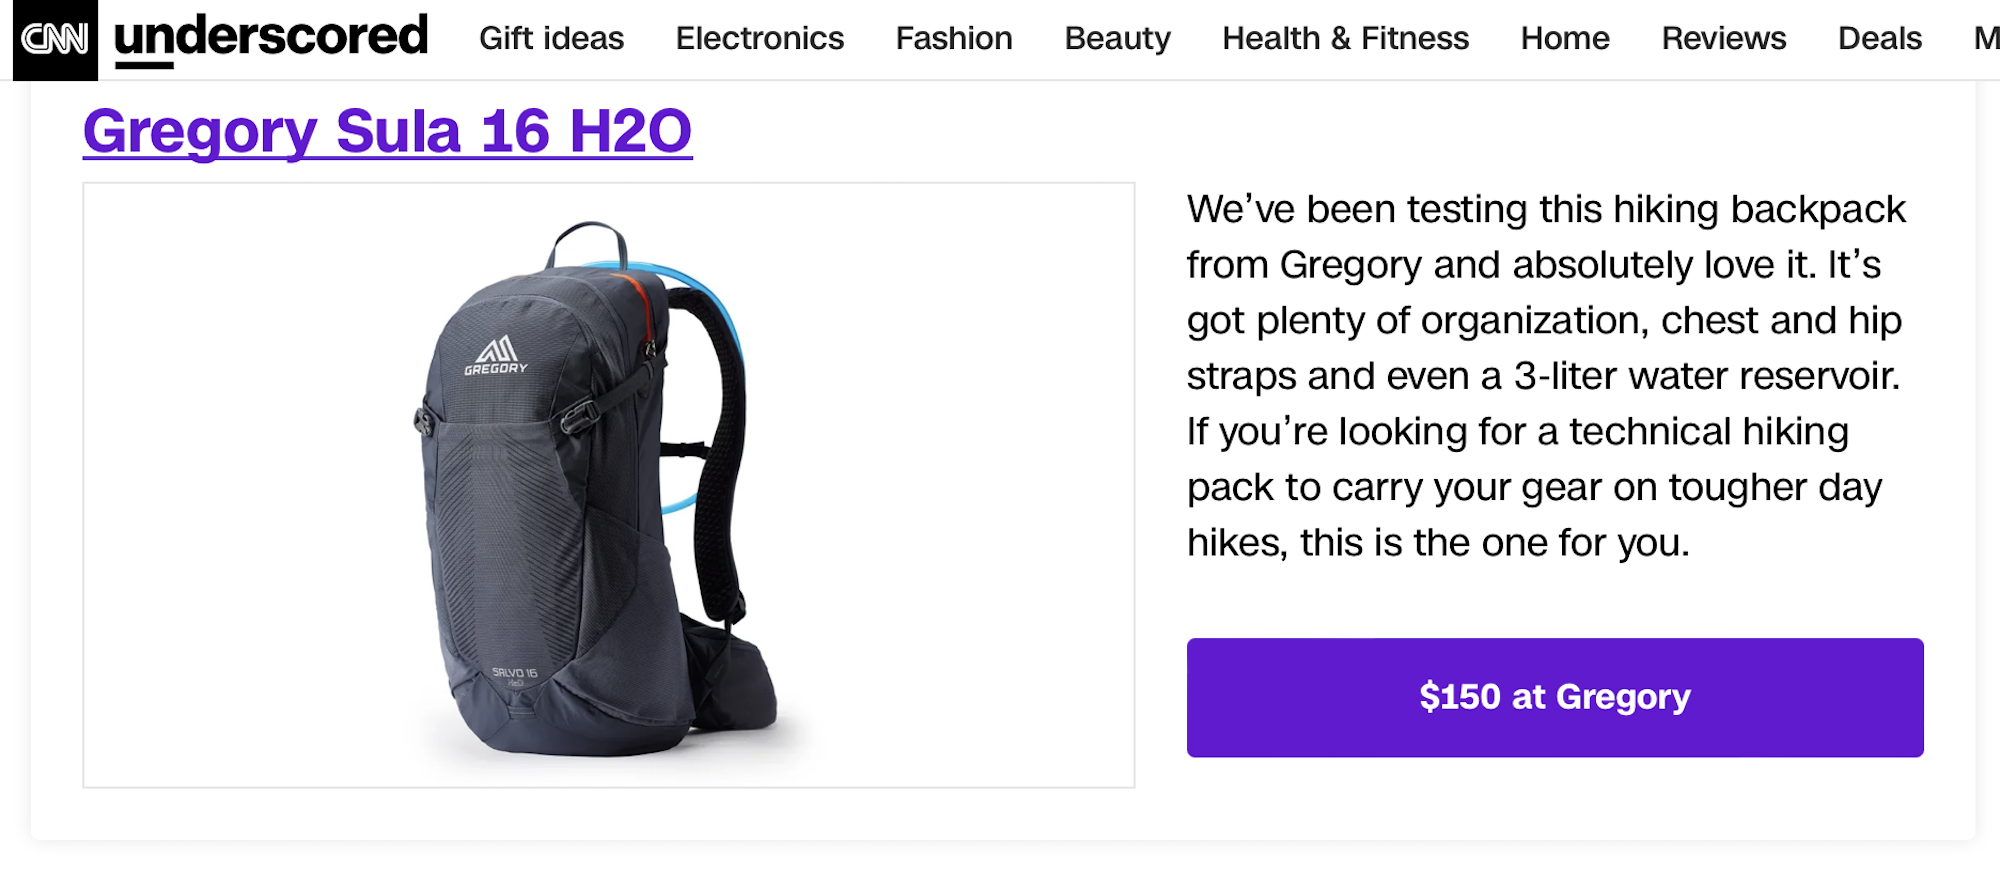 A screenshot of a CNN Underscored post about Gregory's Sula 16 H2O backpack. The accompanying copy is less than 50 words, and lists mostly bland recitation of features like "plenty of organization, chest and hip straps, and even a 3-liter water reservoir" which are standard on almost any pack in this 16-liter hiking pack category.